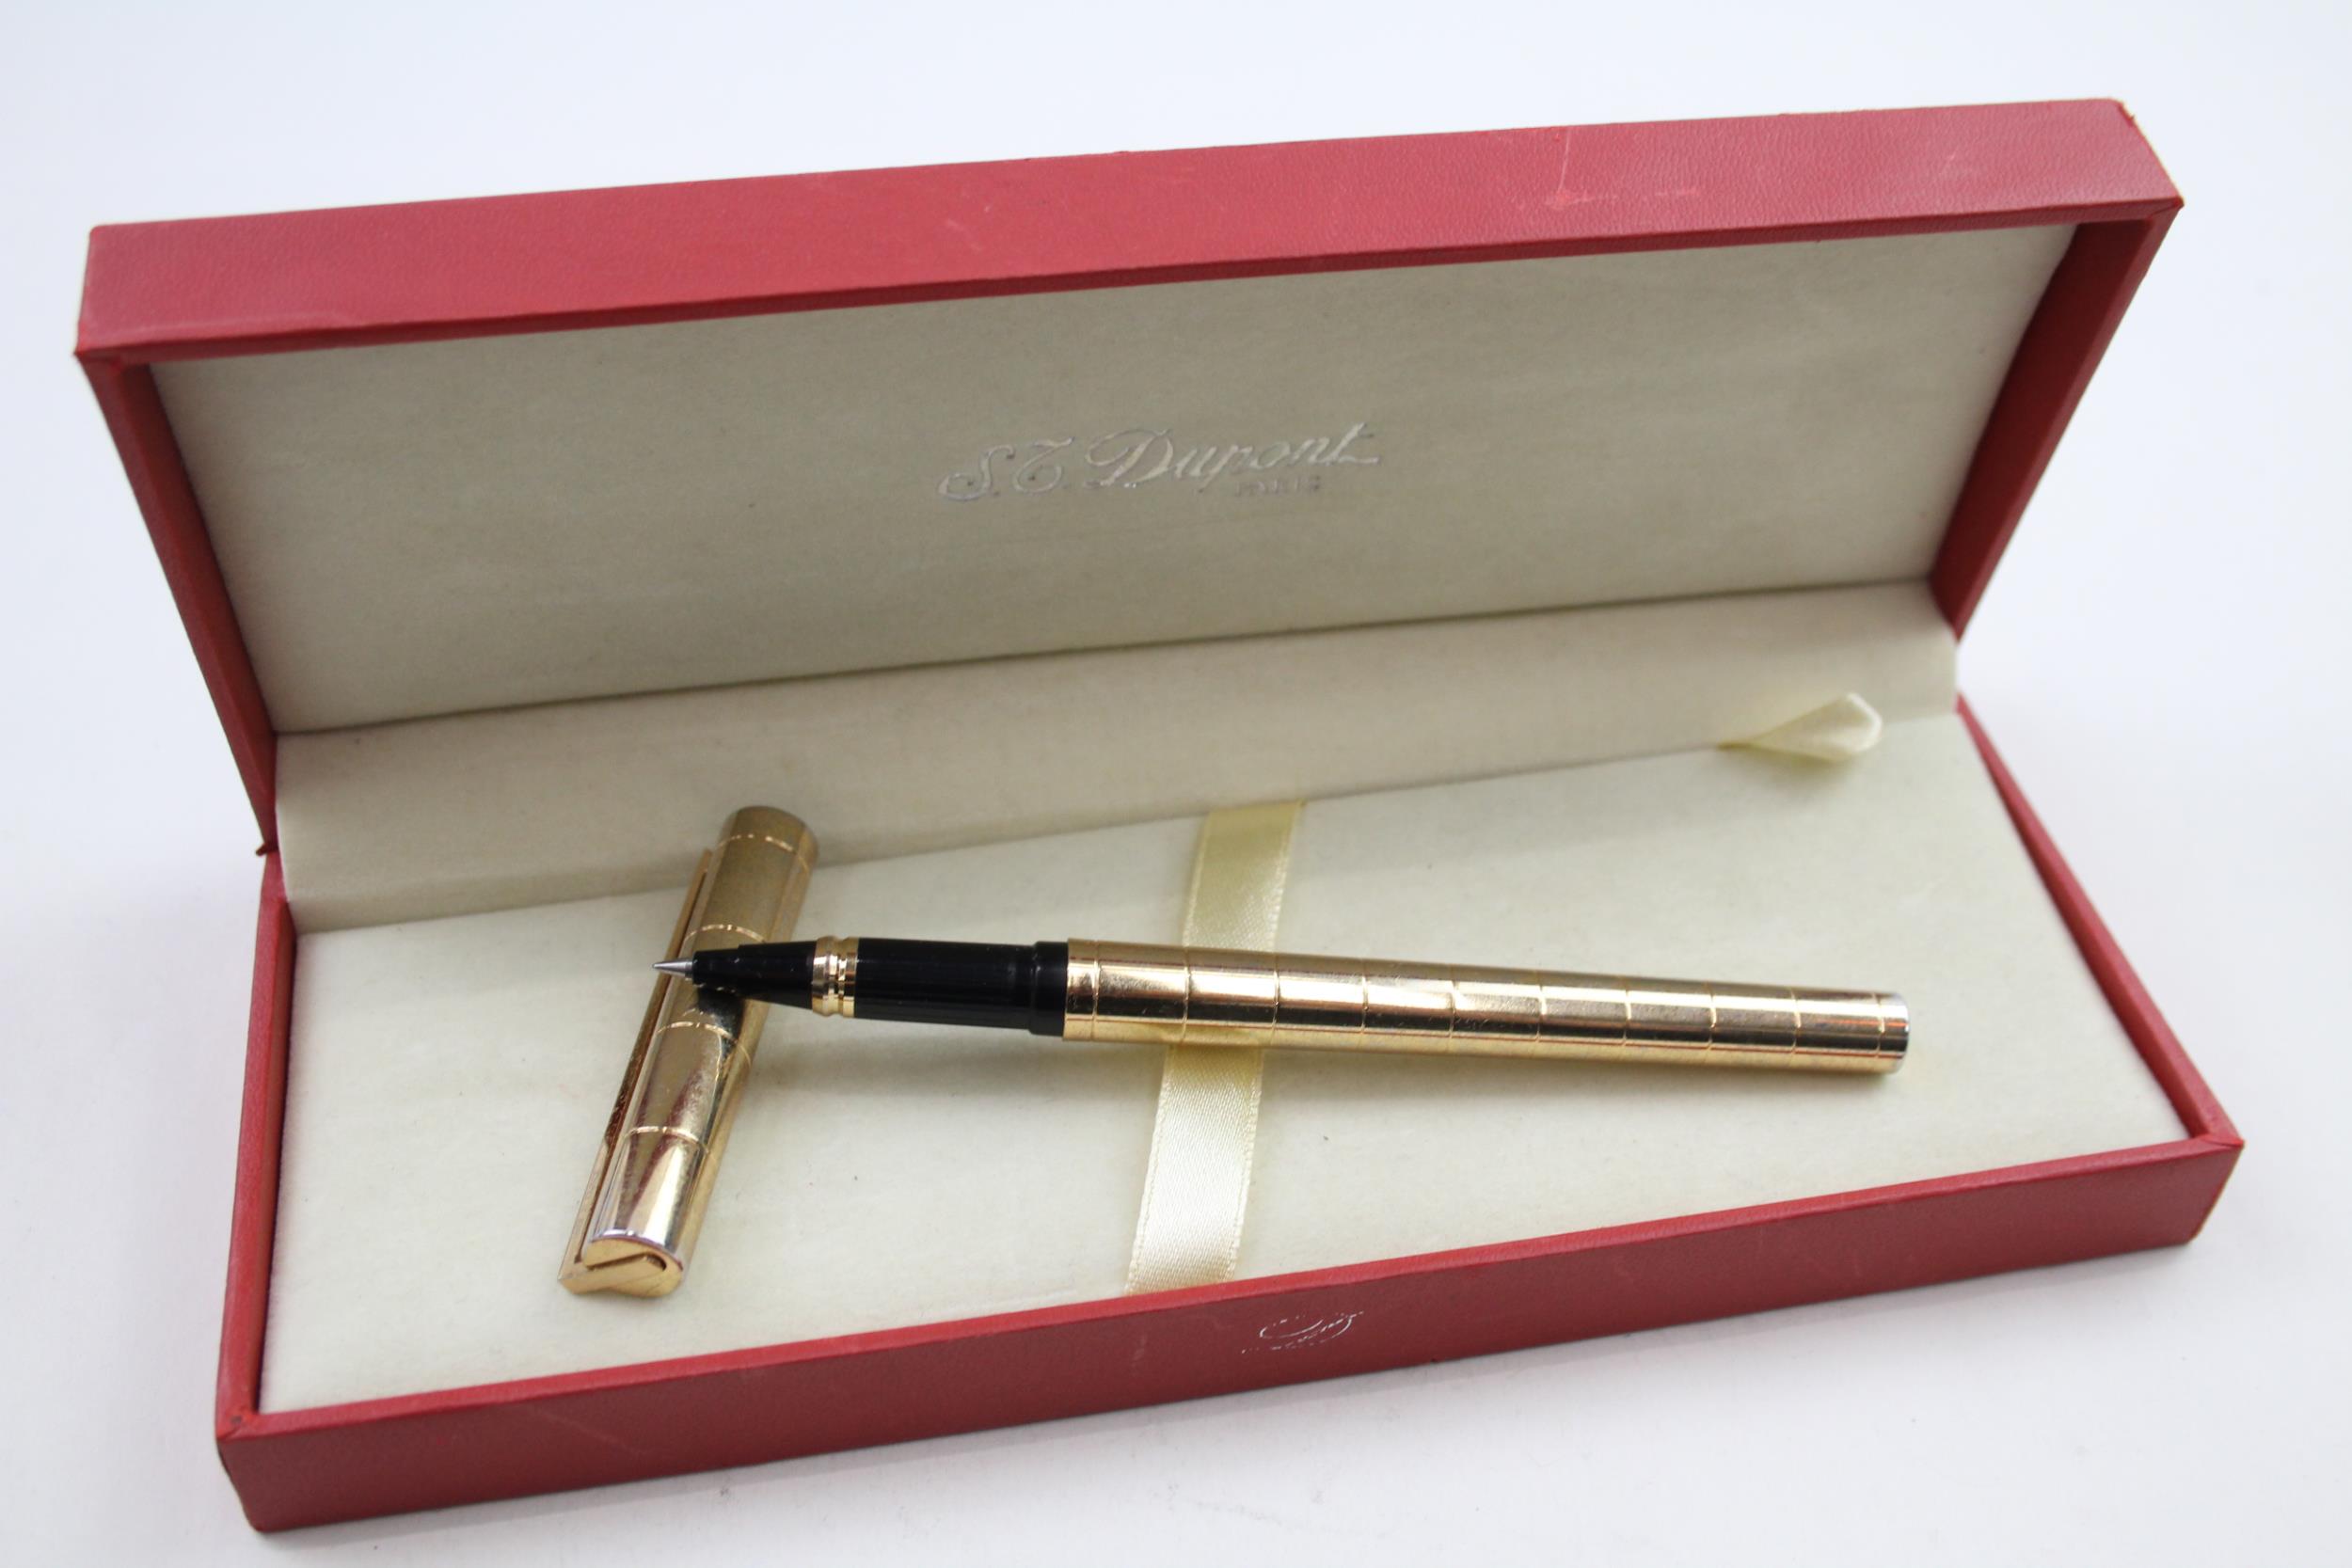 S.T DUPONT Gold Plated Rollerball Pen In Original Box - SG9FE66 - UNTESTED In previously owned